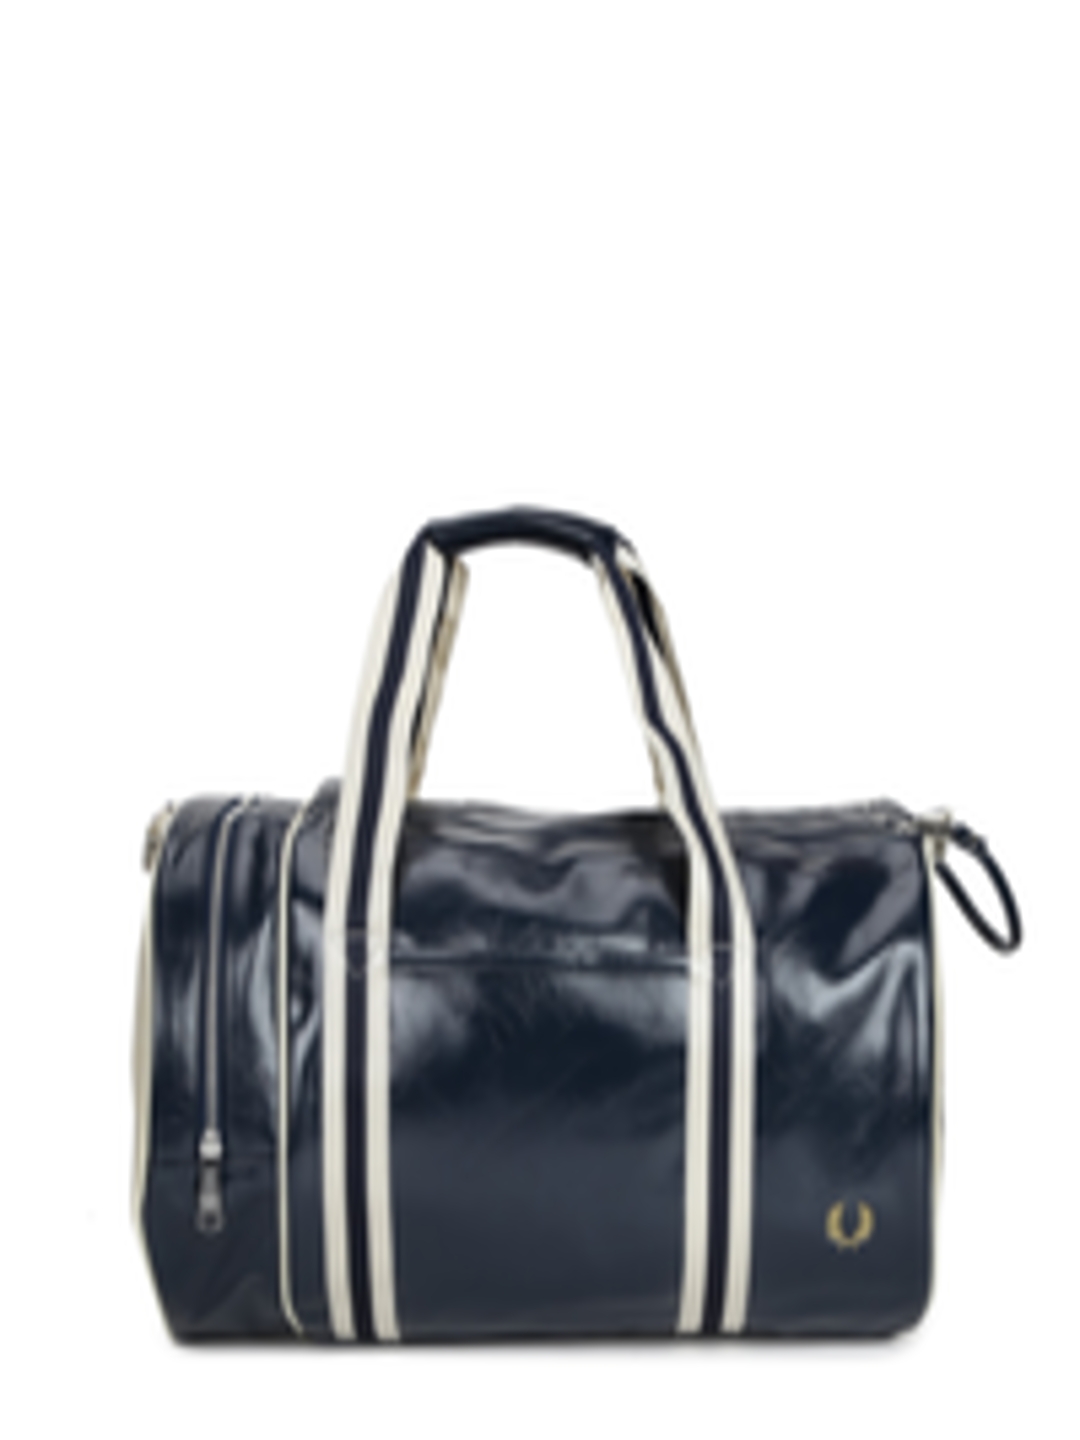 Buy Fred Perry Navy Blue & White Solid Leather Medium Duffel Bag ...